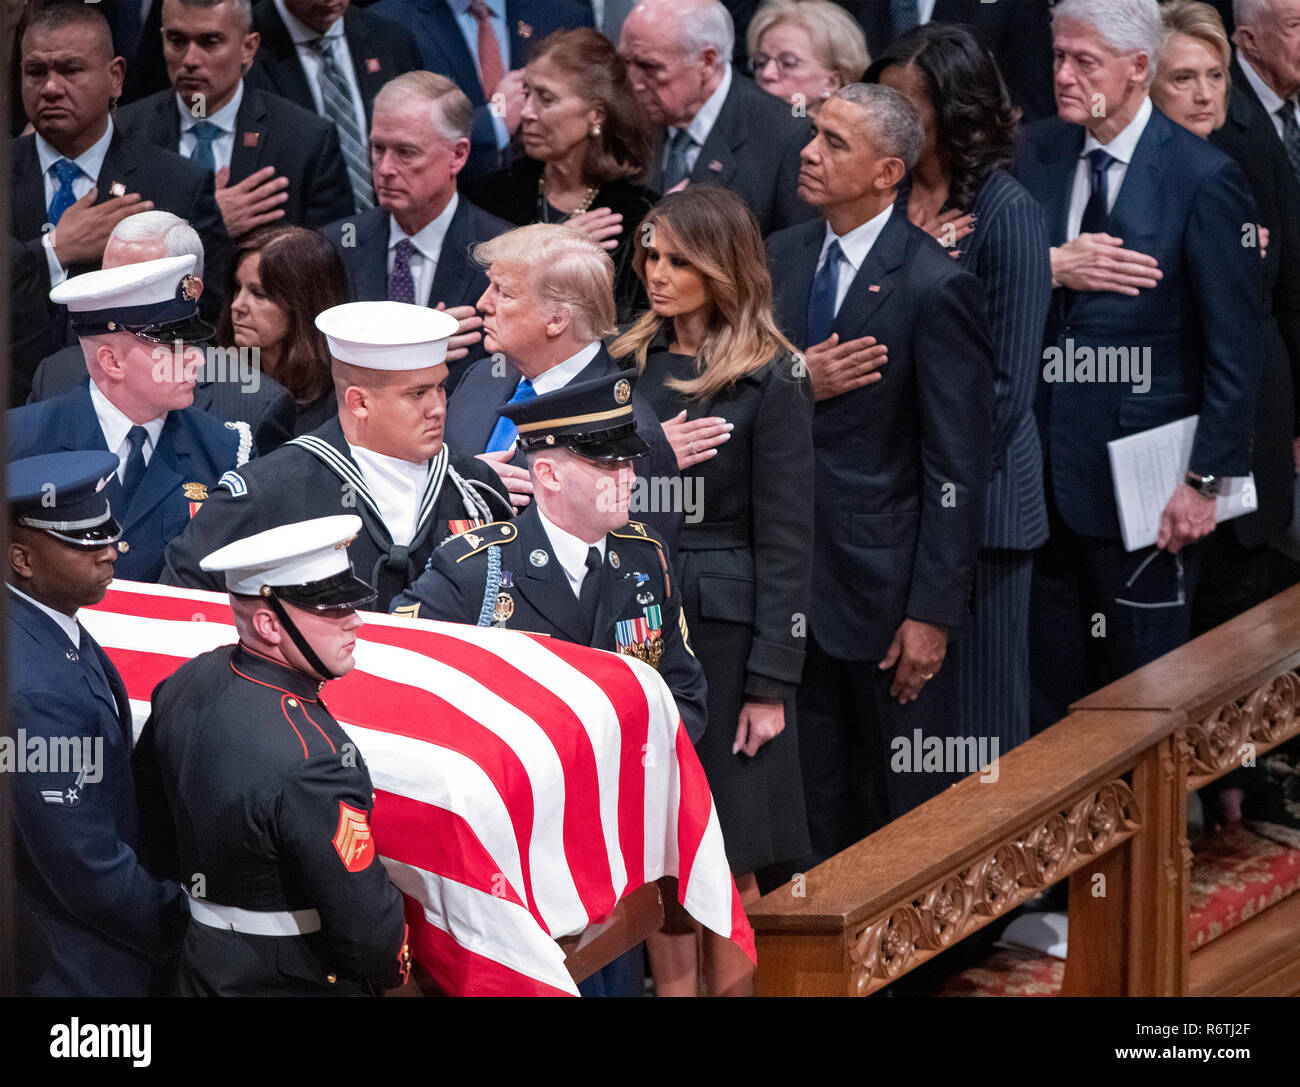 National funeral service in honor of the late former United States President George H.W. Bush at the Washington National Cathedral in Washington, DC on Wednesday, December 5, 2018. Visible in the frame are former US Vice President Dan Quayle, Marilyn Quayle, US President Donald J. Trump, first lady Melania Trump, former US President Barack Obama former US President Bill Clinton and former US Secretary of State Hillary Rodham Clinton. Credit: Ron Sachs/CNP (RESTRICTION: NO New York or New Jersey Newspapers or newspapers within a 75 mile radius of New York City) | usage worldwide Stock Photo